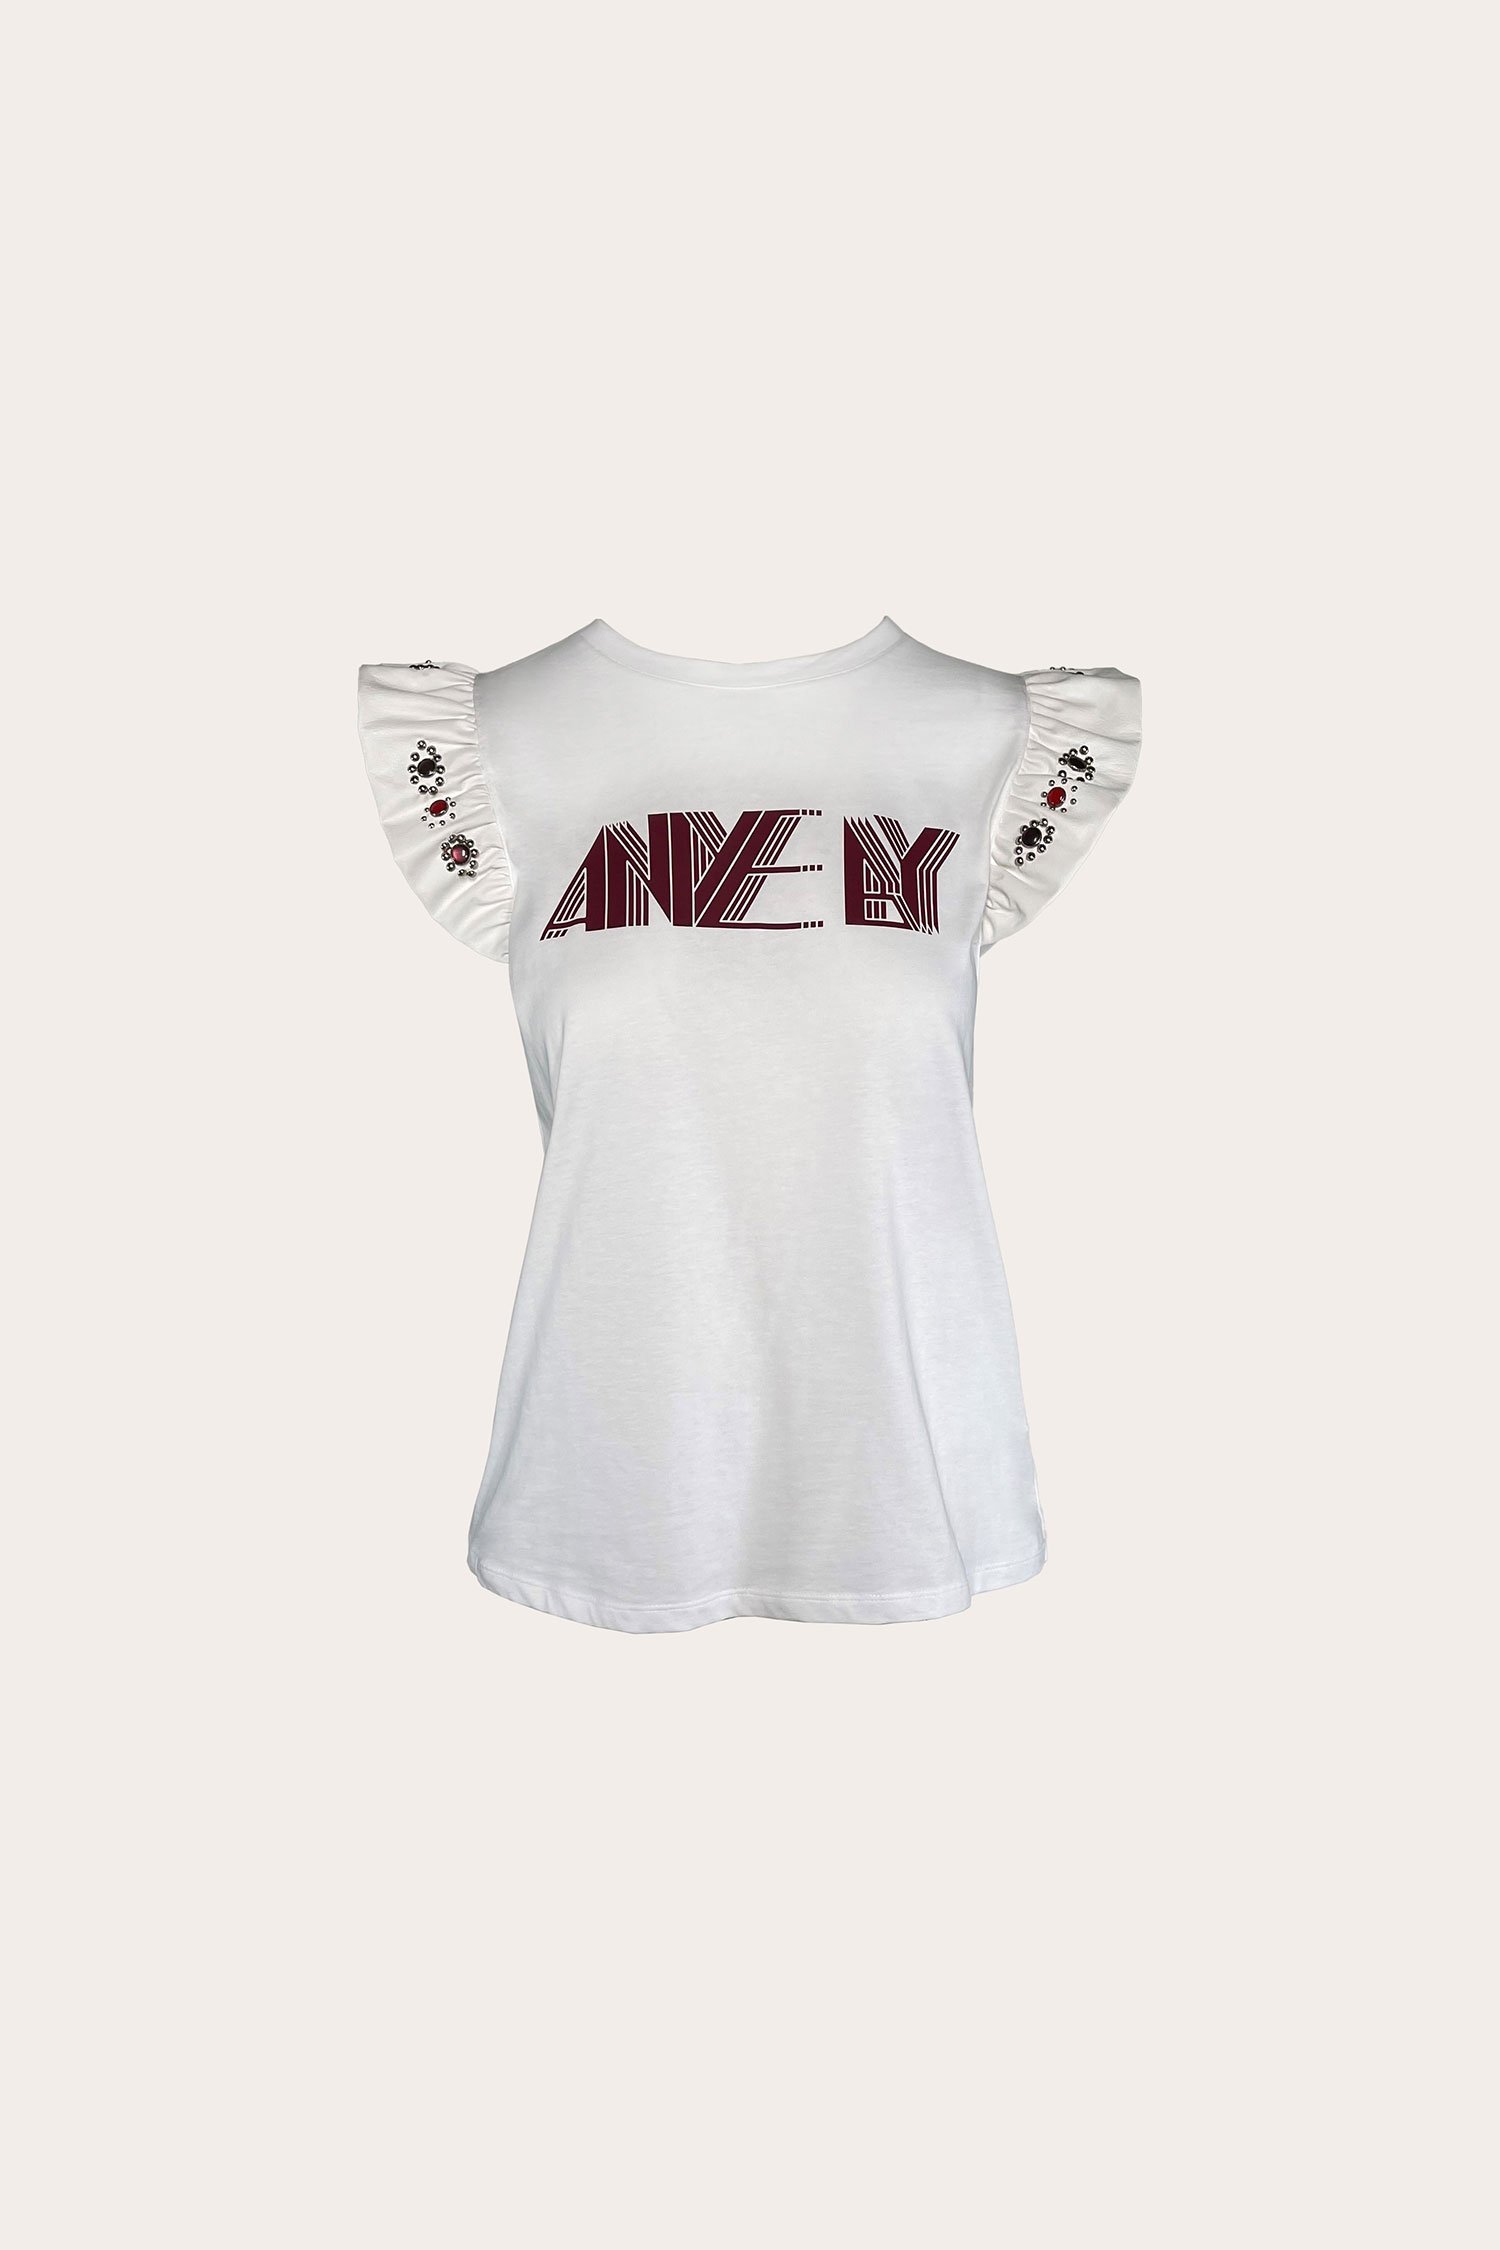 T-SHIRT ANYIEROUCHES